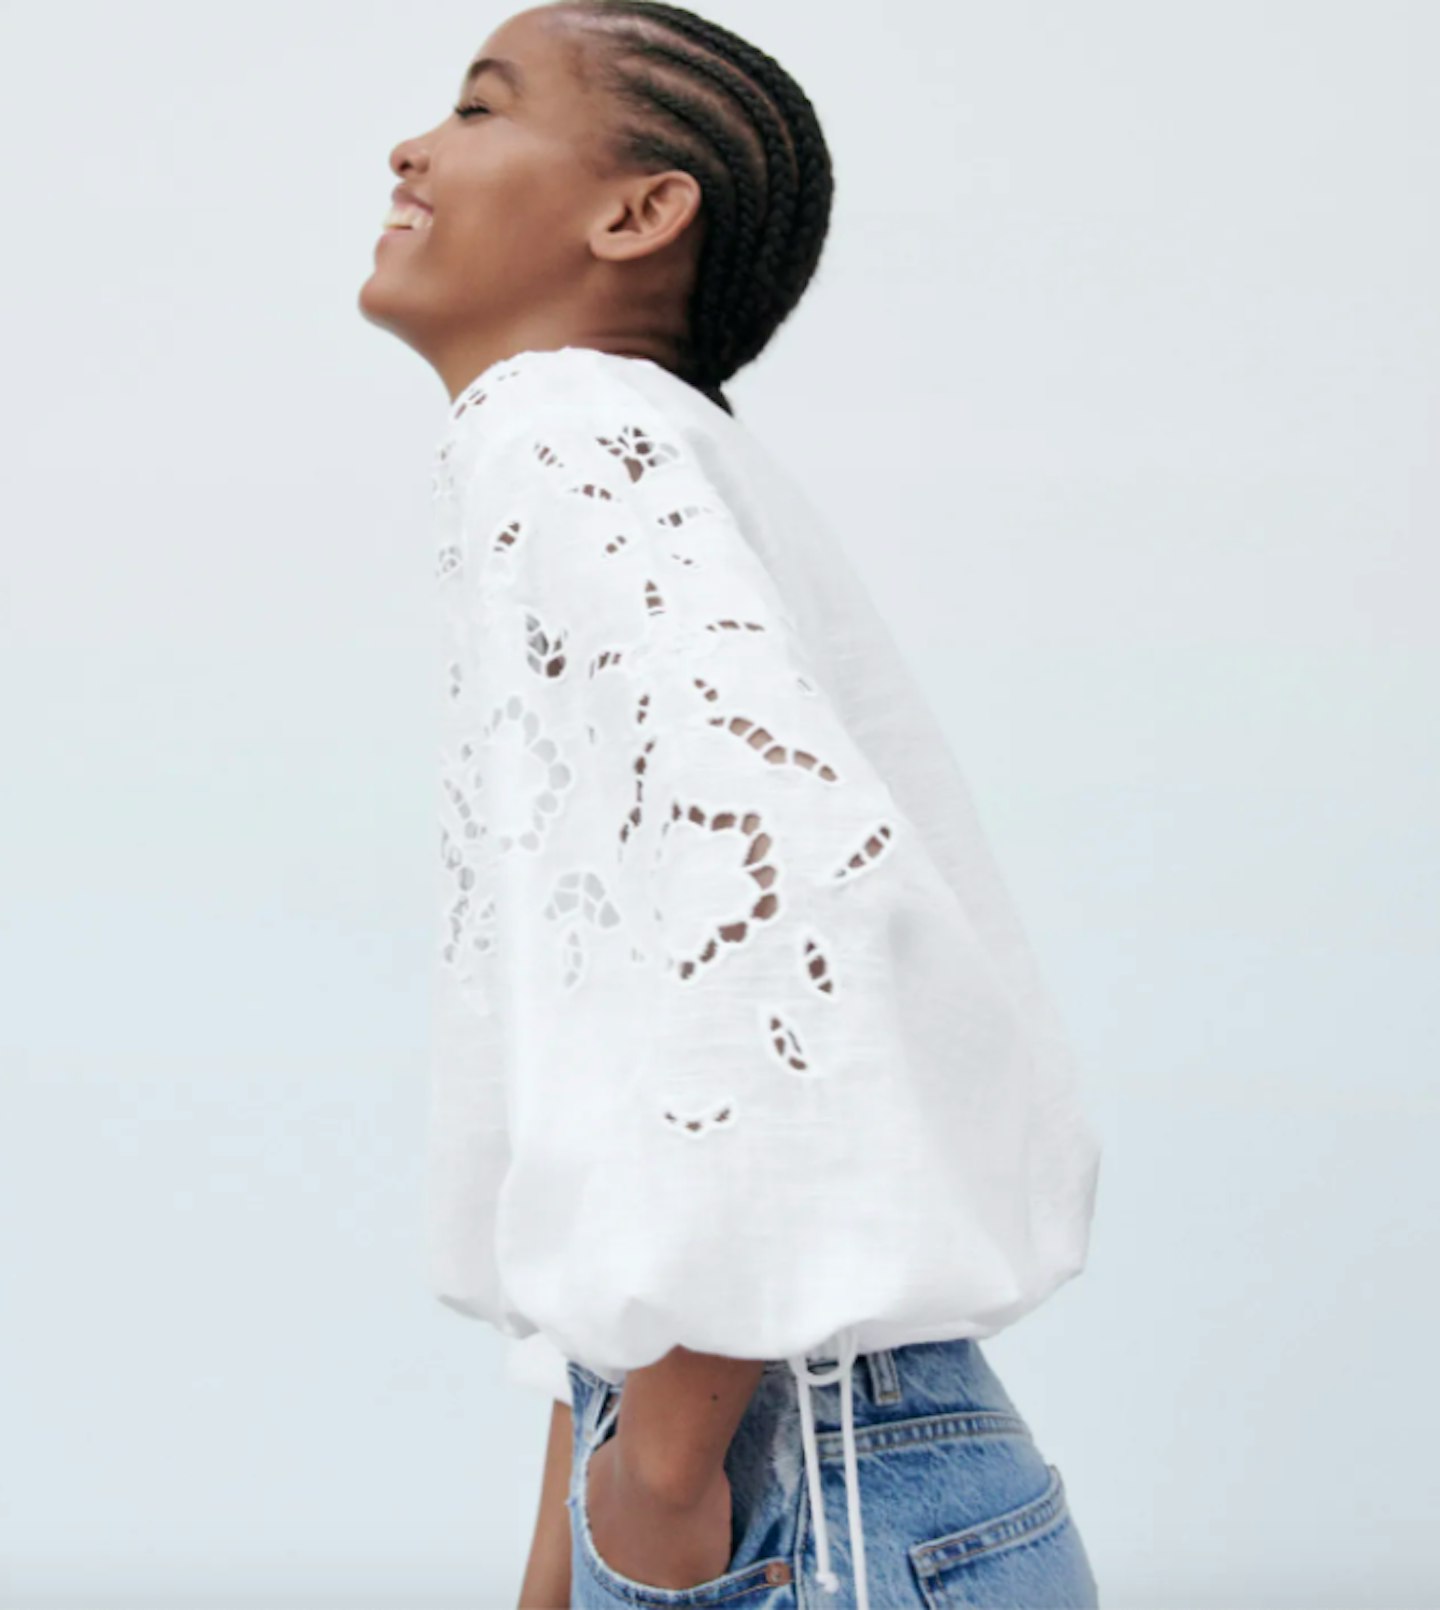 Zara, Shirt With Cut-Work Embroidery, £29.99